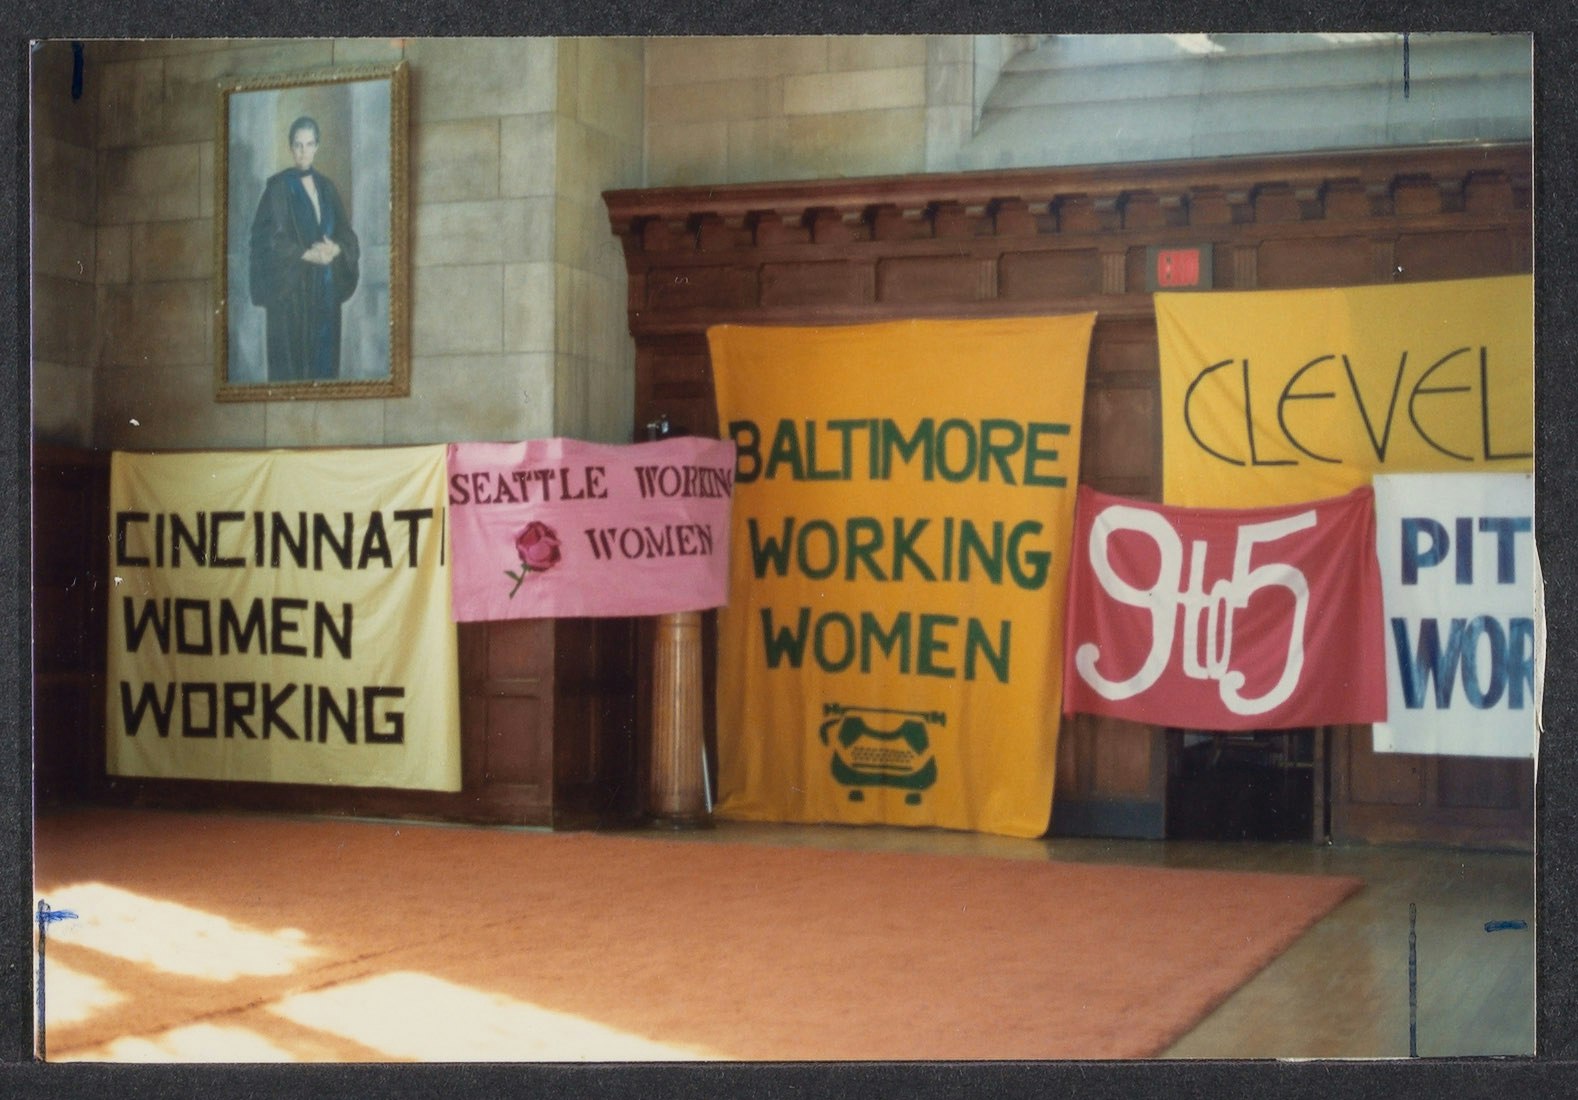 Banners on display at the 3rd annual Working Women's Summer School at Bryn Mawr College